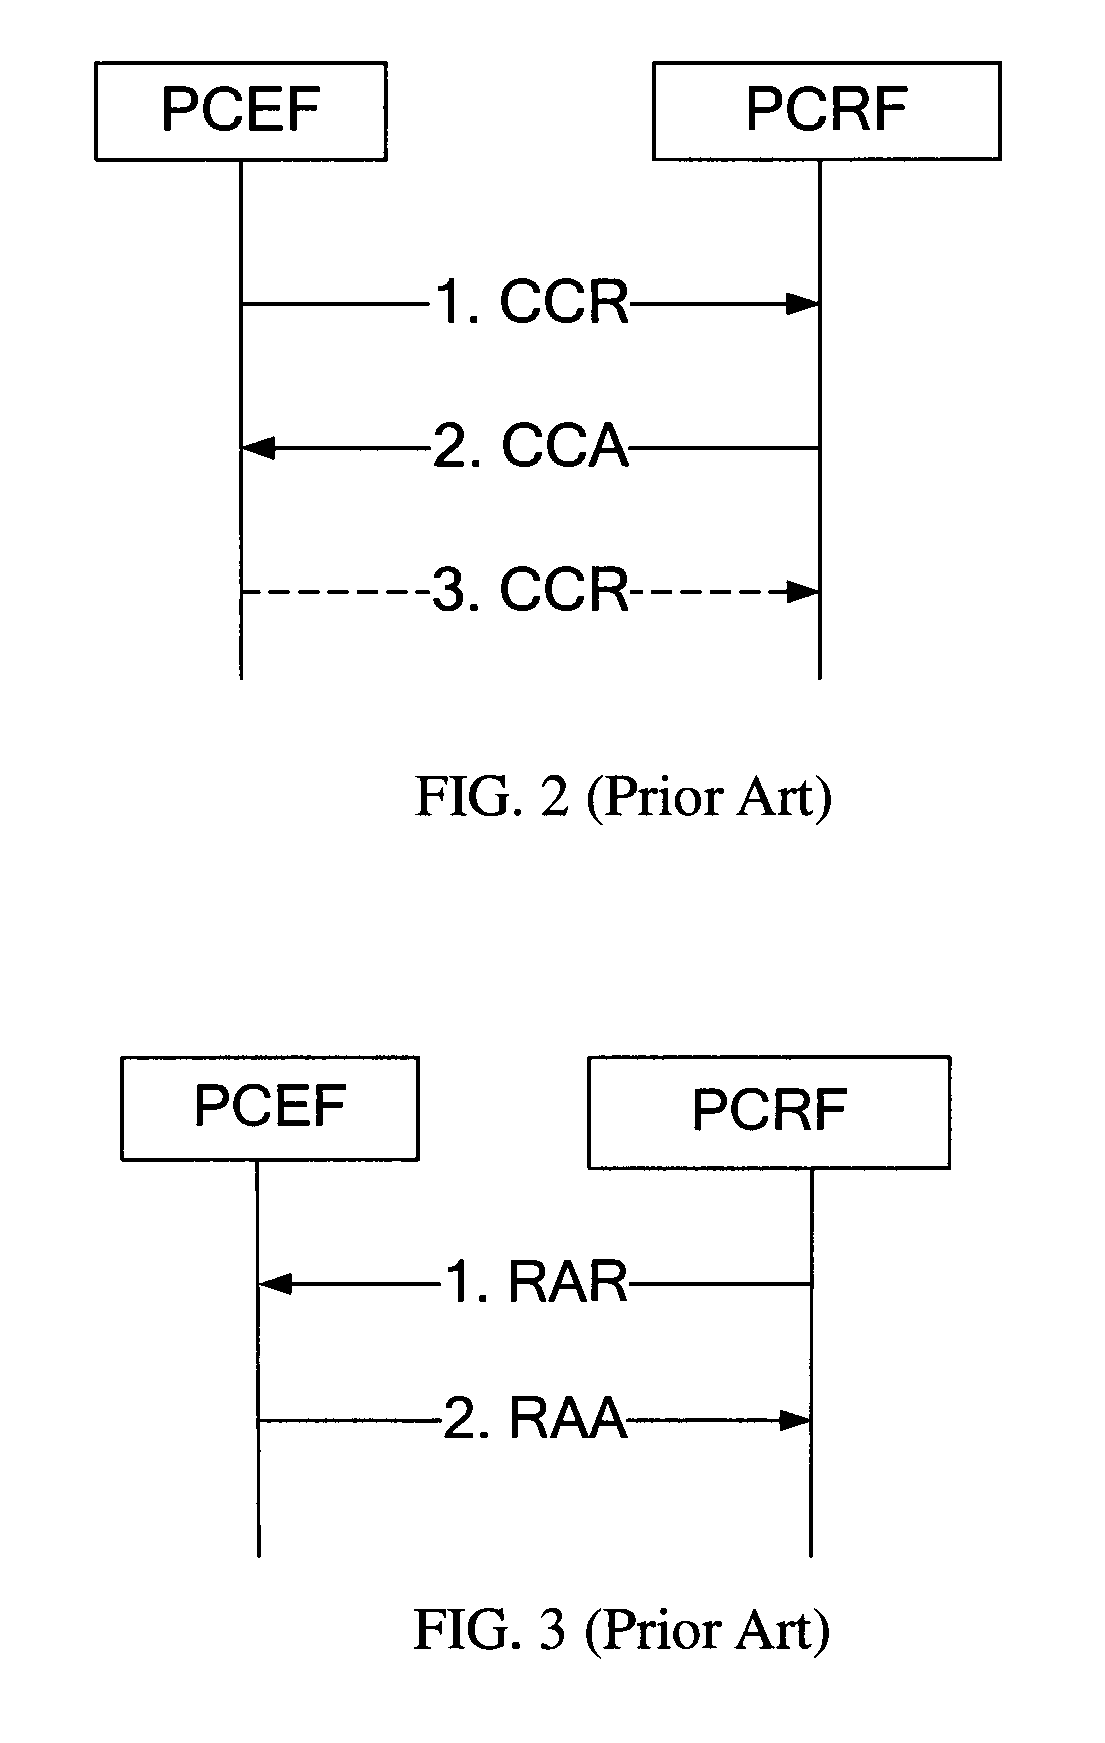 Method, apparatus and system for updating pcc rules